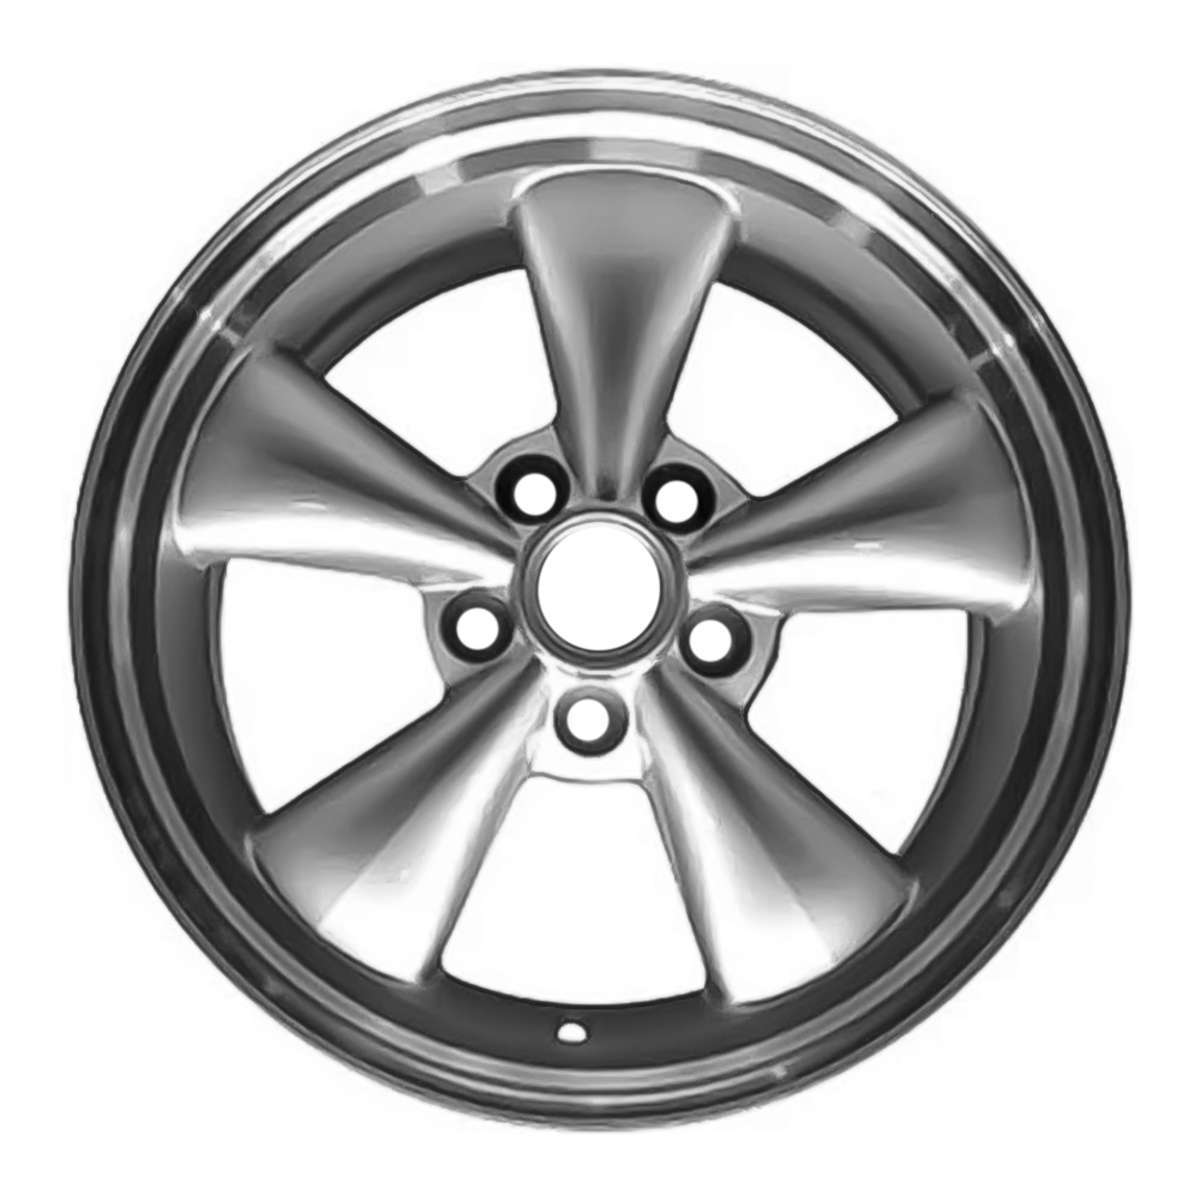 2005 Ford Mustang New 17" Replacement Wheel Rim RW3589MC